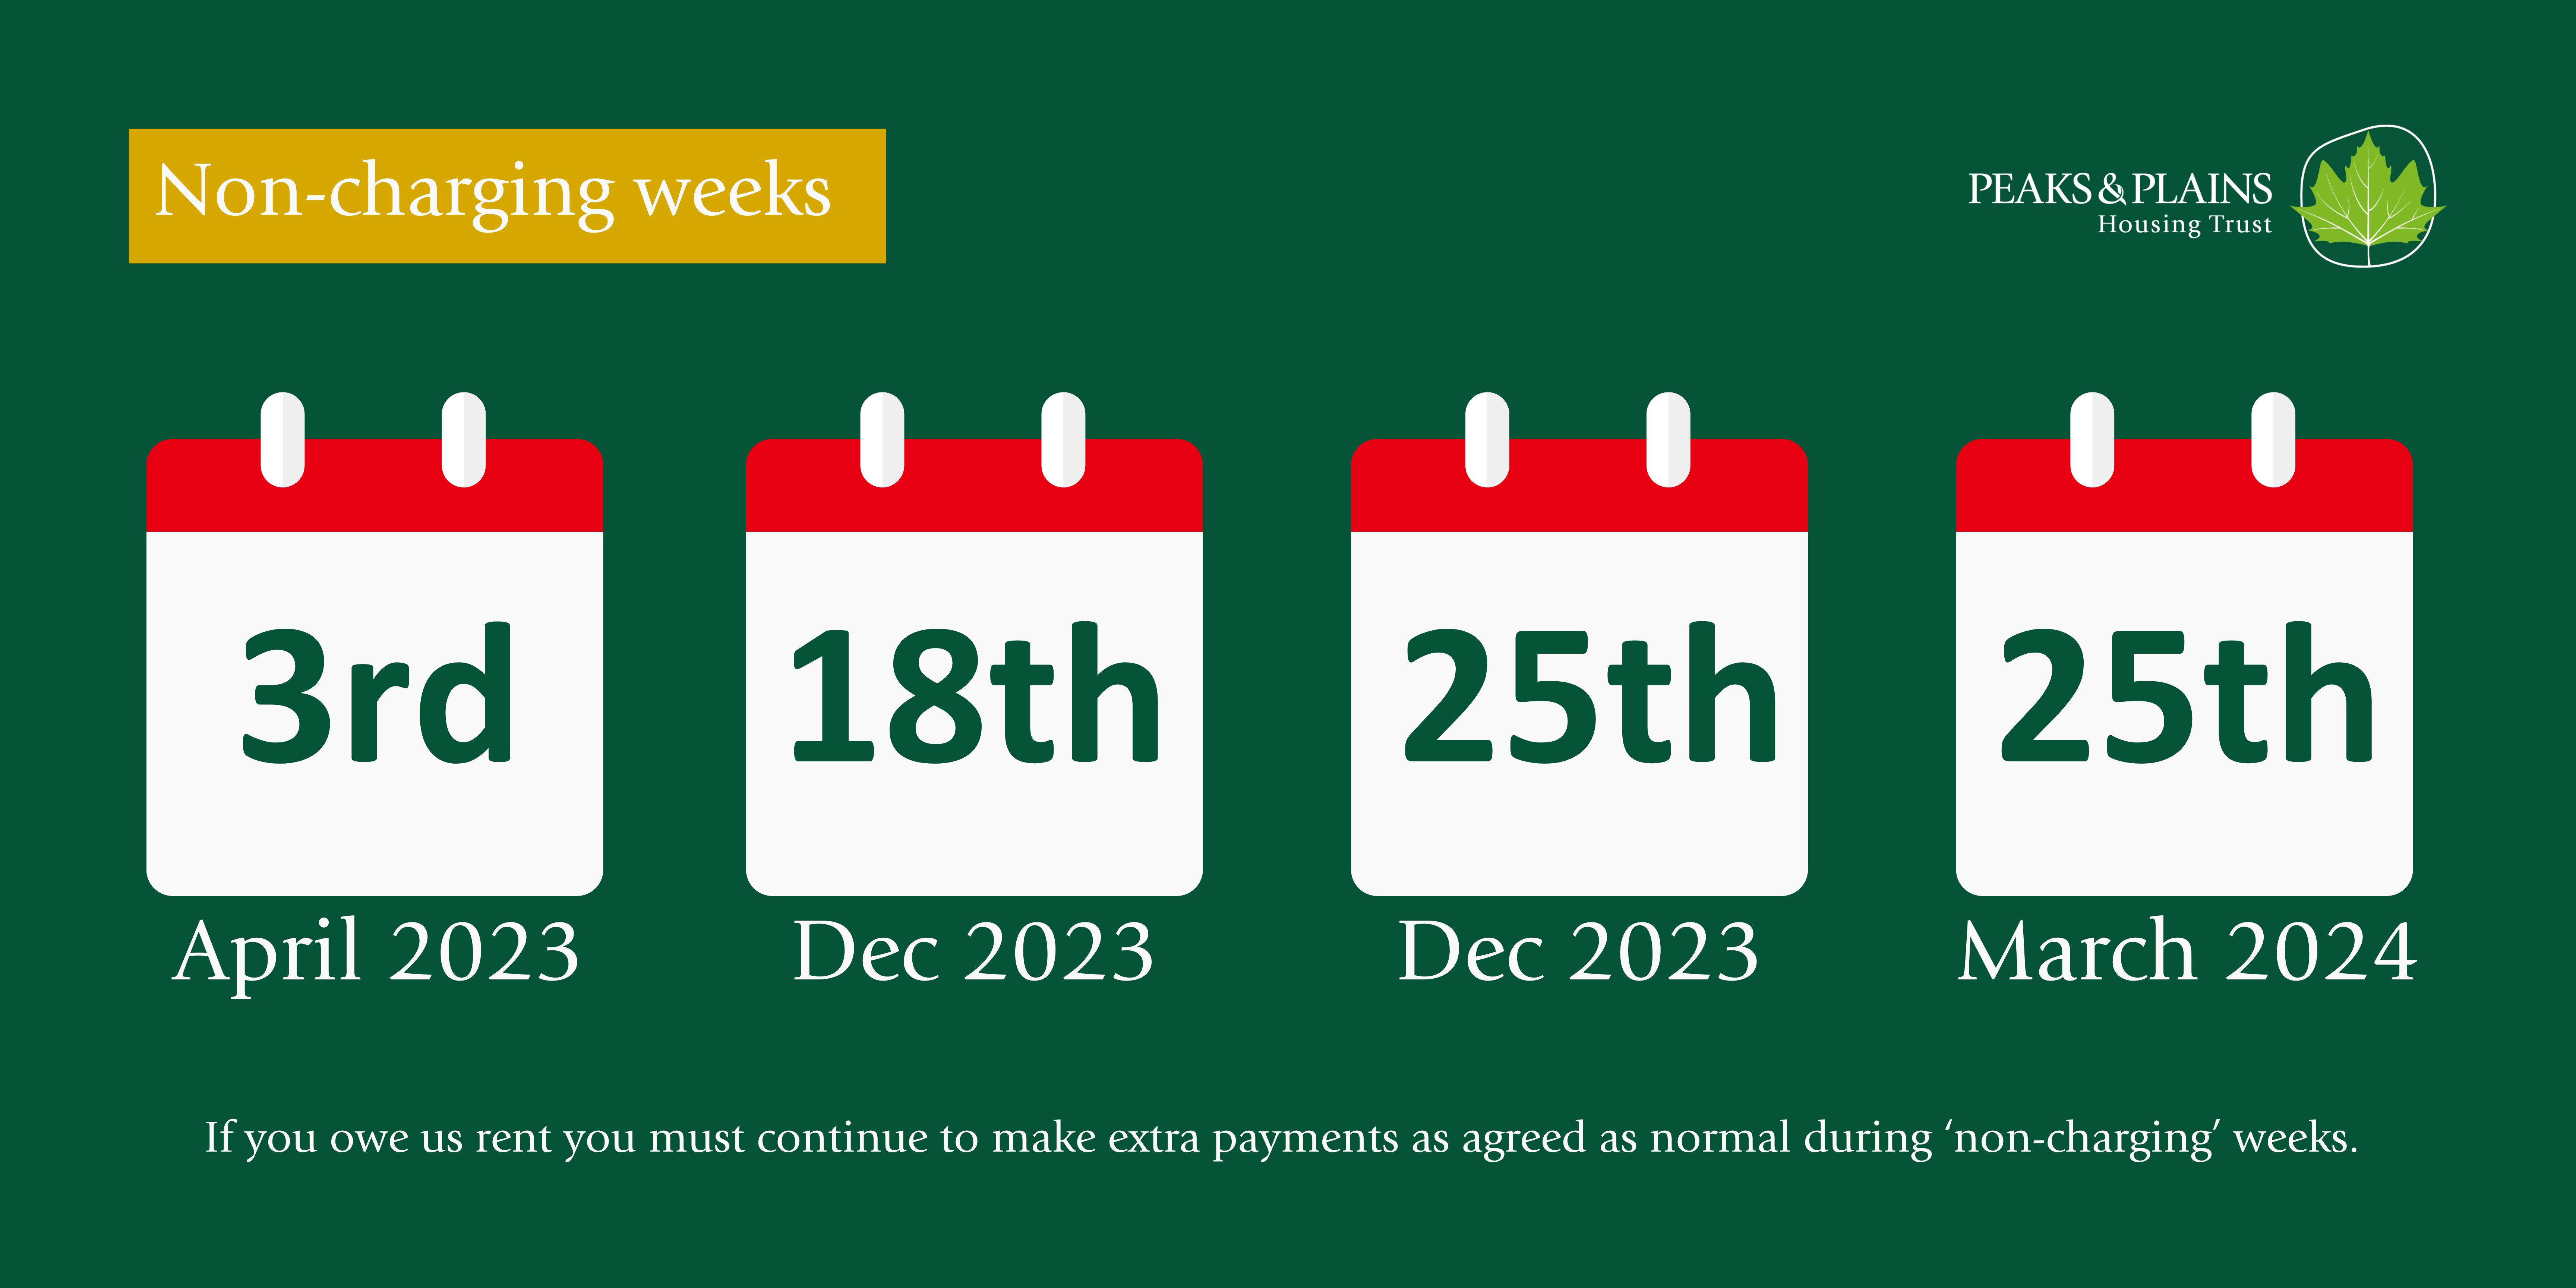 Remember, if you owe rent on your home you must continue to make extra payments as agreed during these weeks.